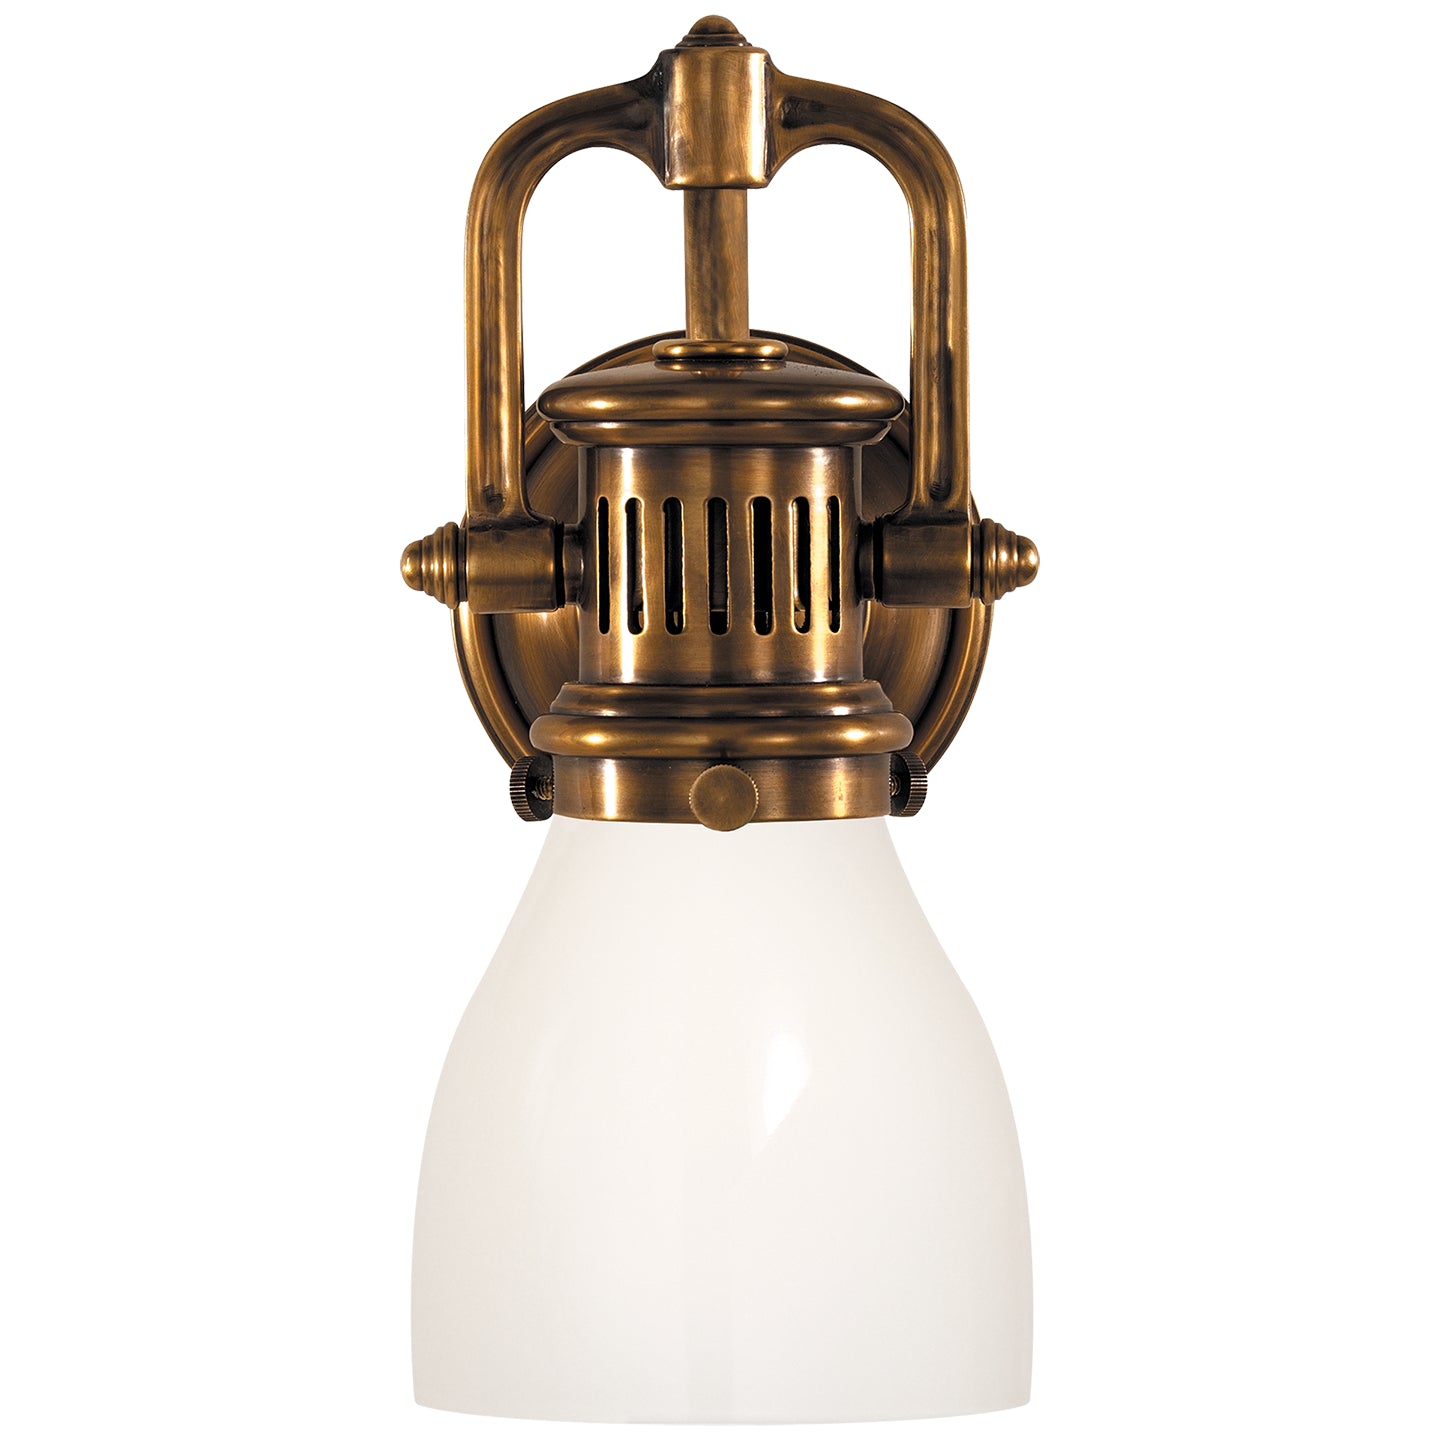 Visual Comfort Signature - SL 2975HAB-WG - One Light Wall Sconce - Yoke - Hand-Rubbed Antique Brass